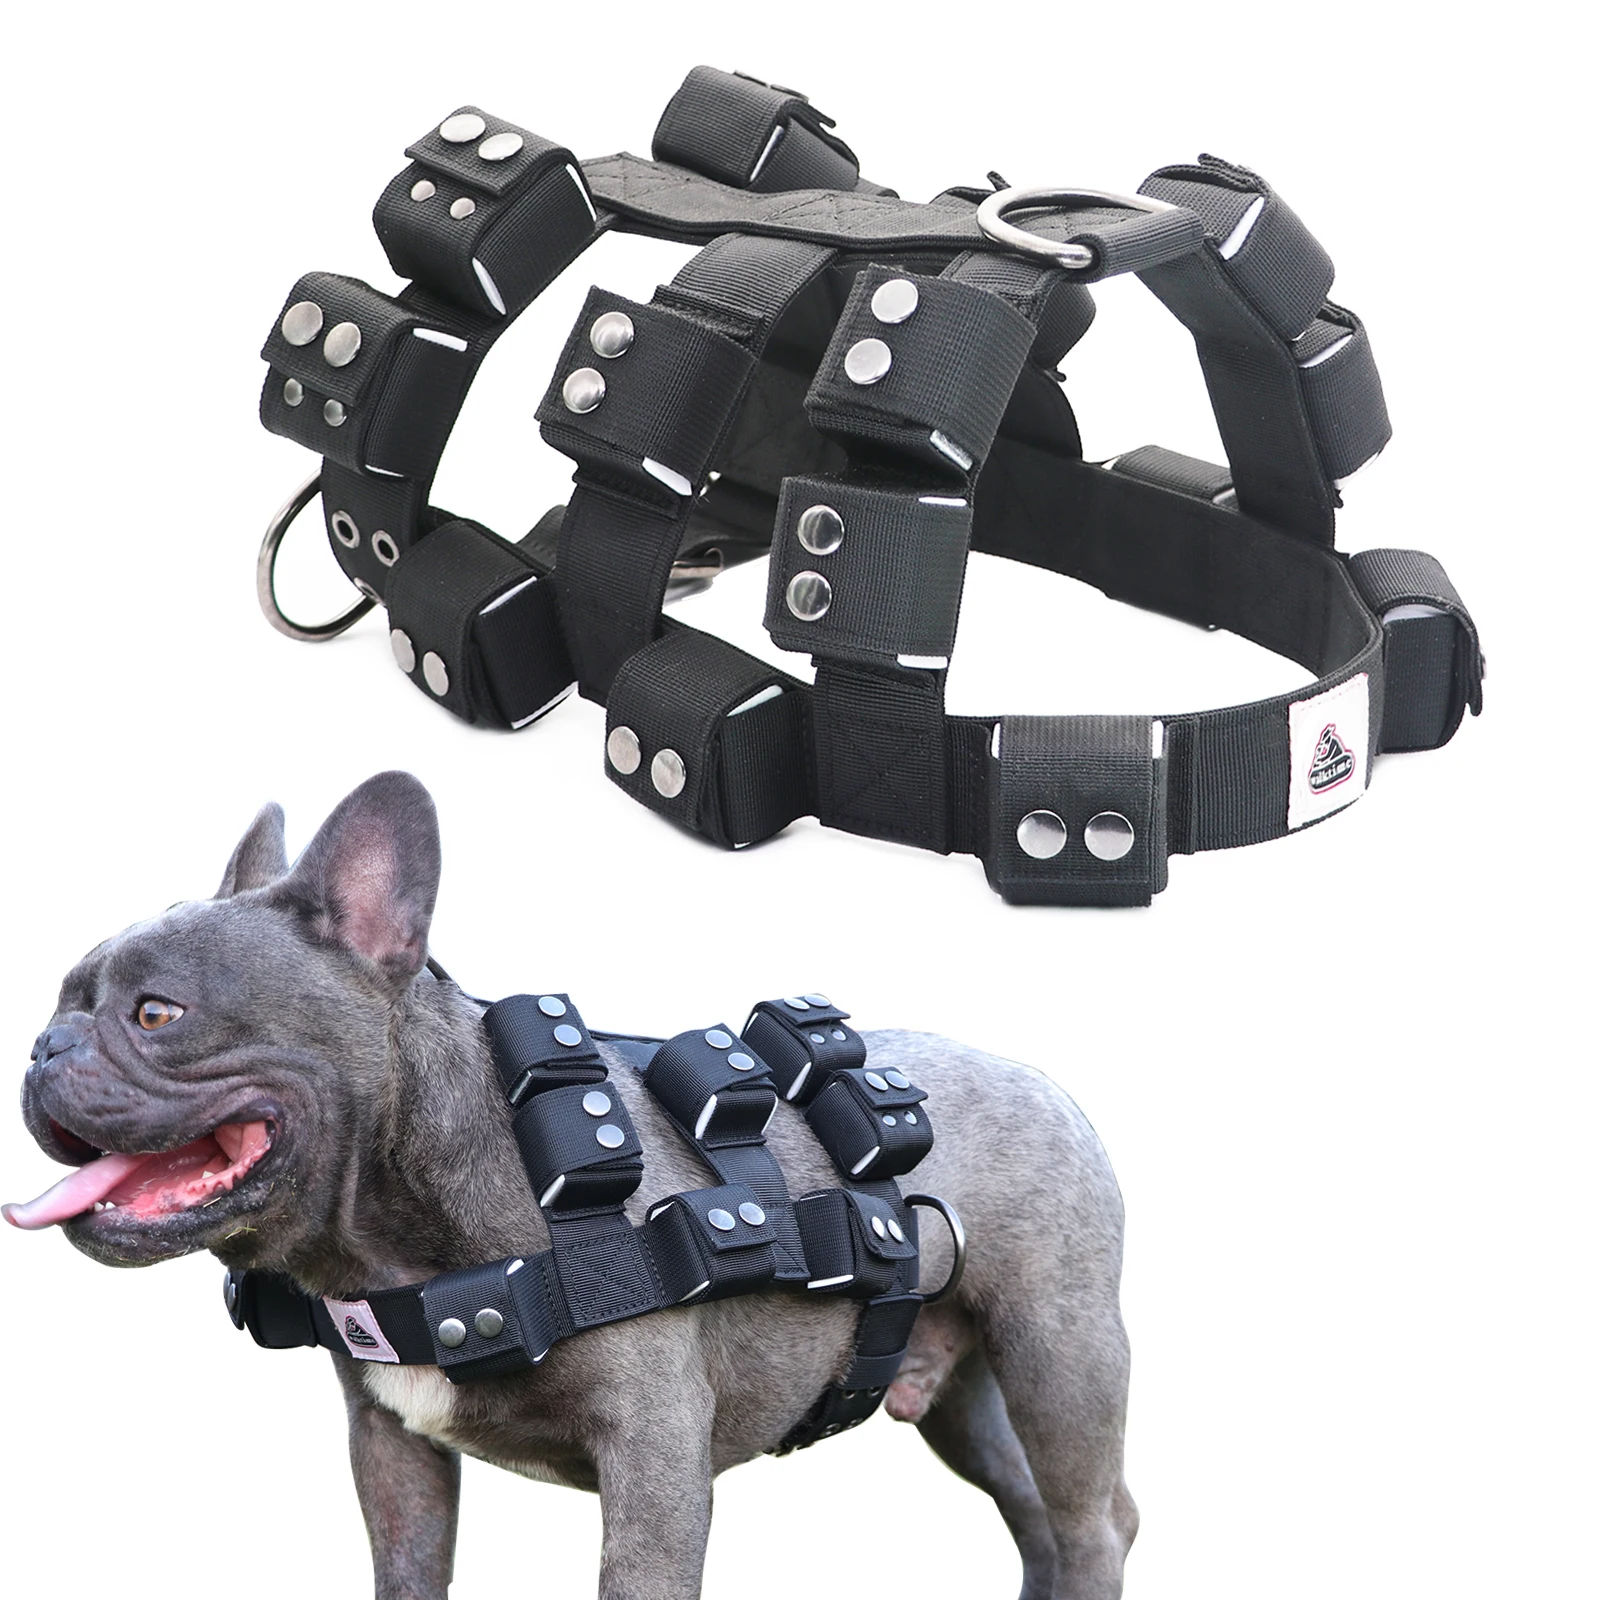 Dog Weighted Vest, Adjustable Weights Vest, No Pull Dog Harness with Pockets for Building Muscle and Excerise Training